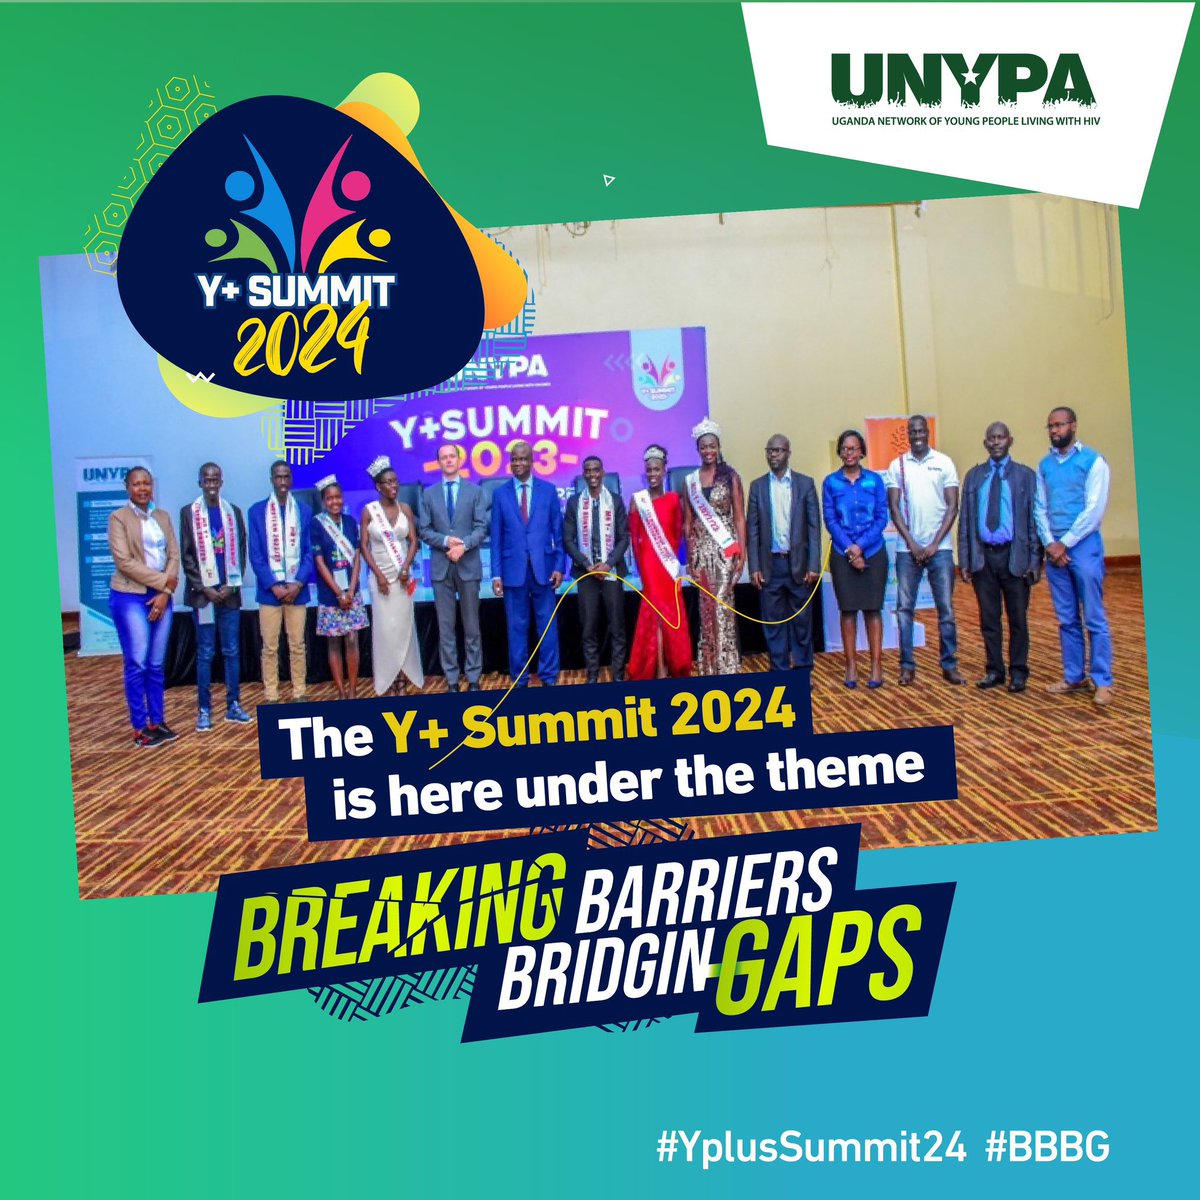 Will be part of the #YplusSummit24 tomorrow exhibiting my #PositiveLiving Products that include Hoodies, T-shirts, Flasks and Mugs. At the same time learning more about breaking the barriers, bridging gaps in the HIV Response among young people. Y’all should come and support.